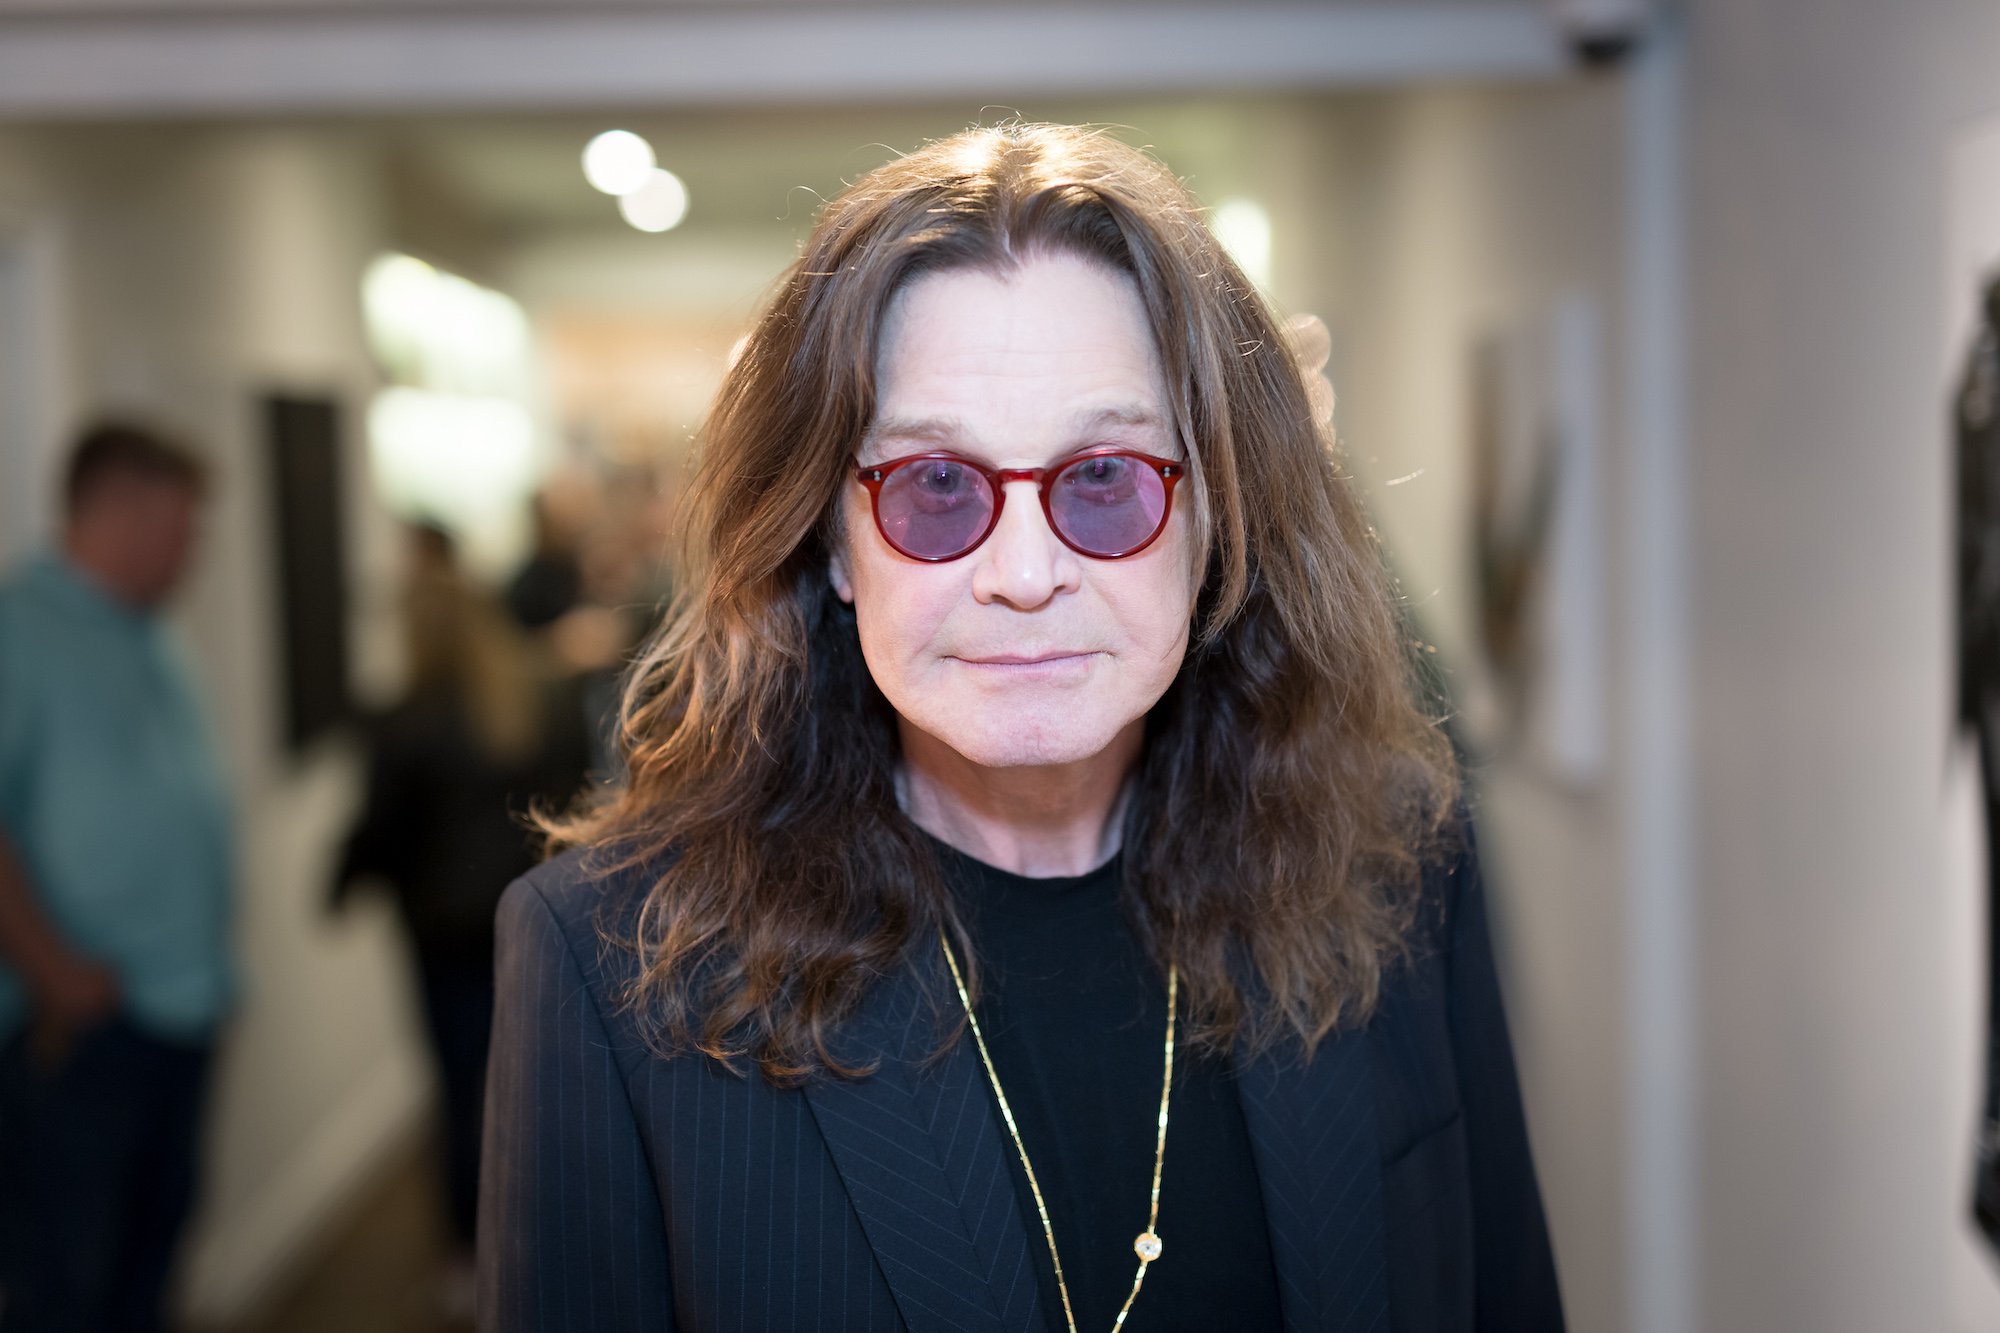 Ozzy Osbourne smiling in front of a blurred background